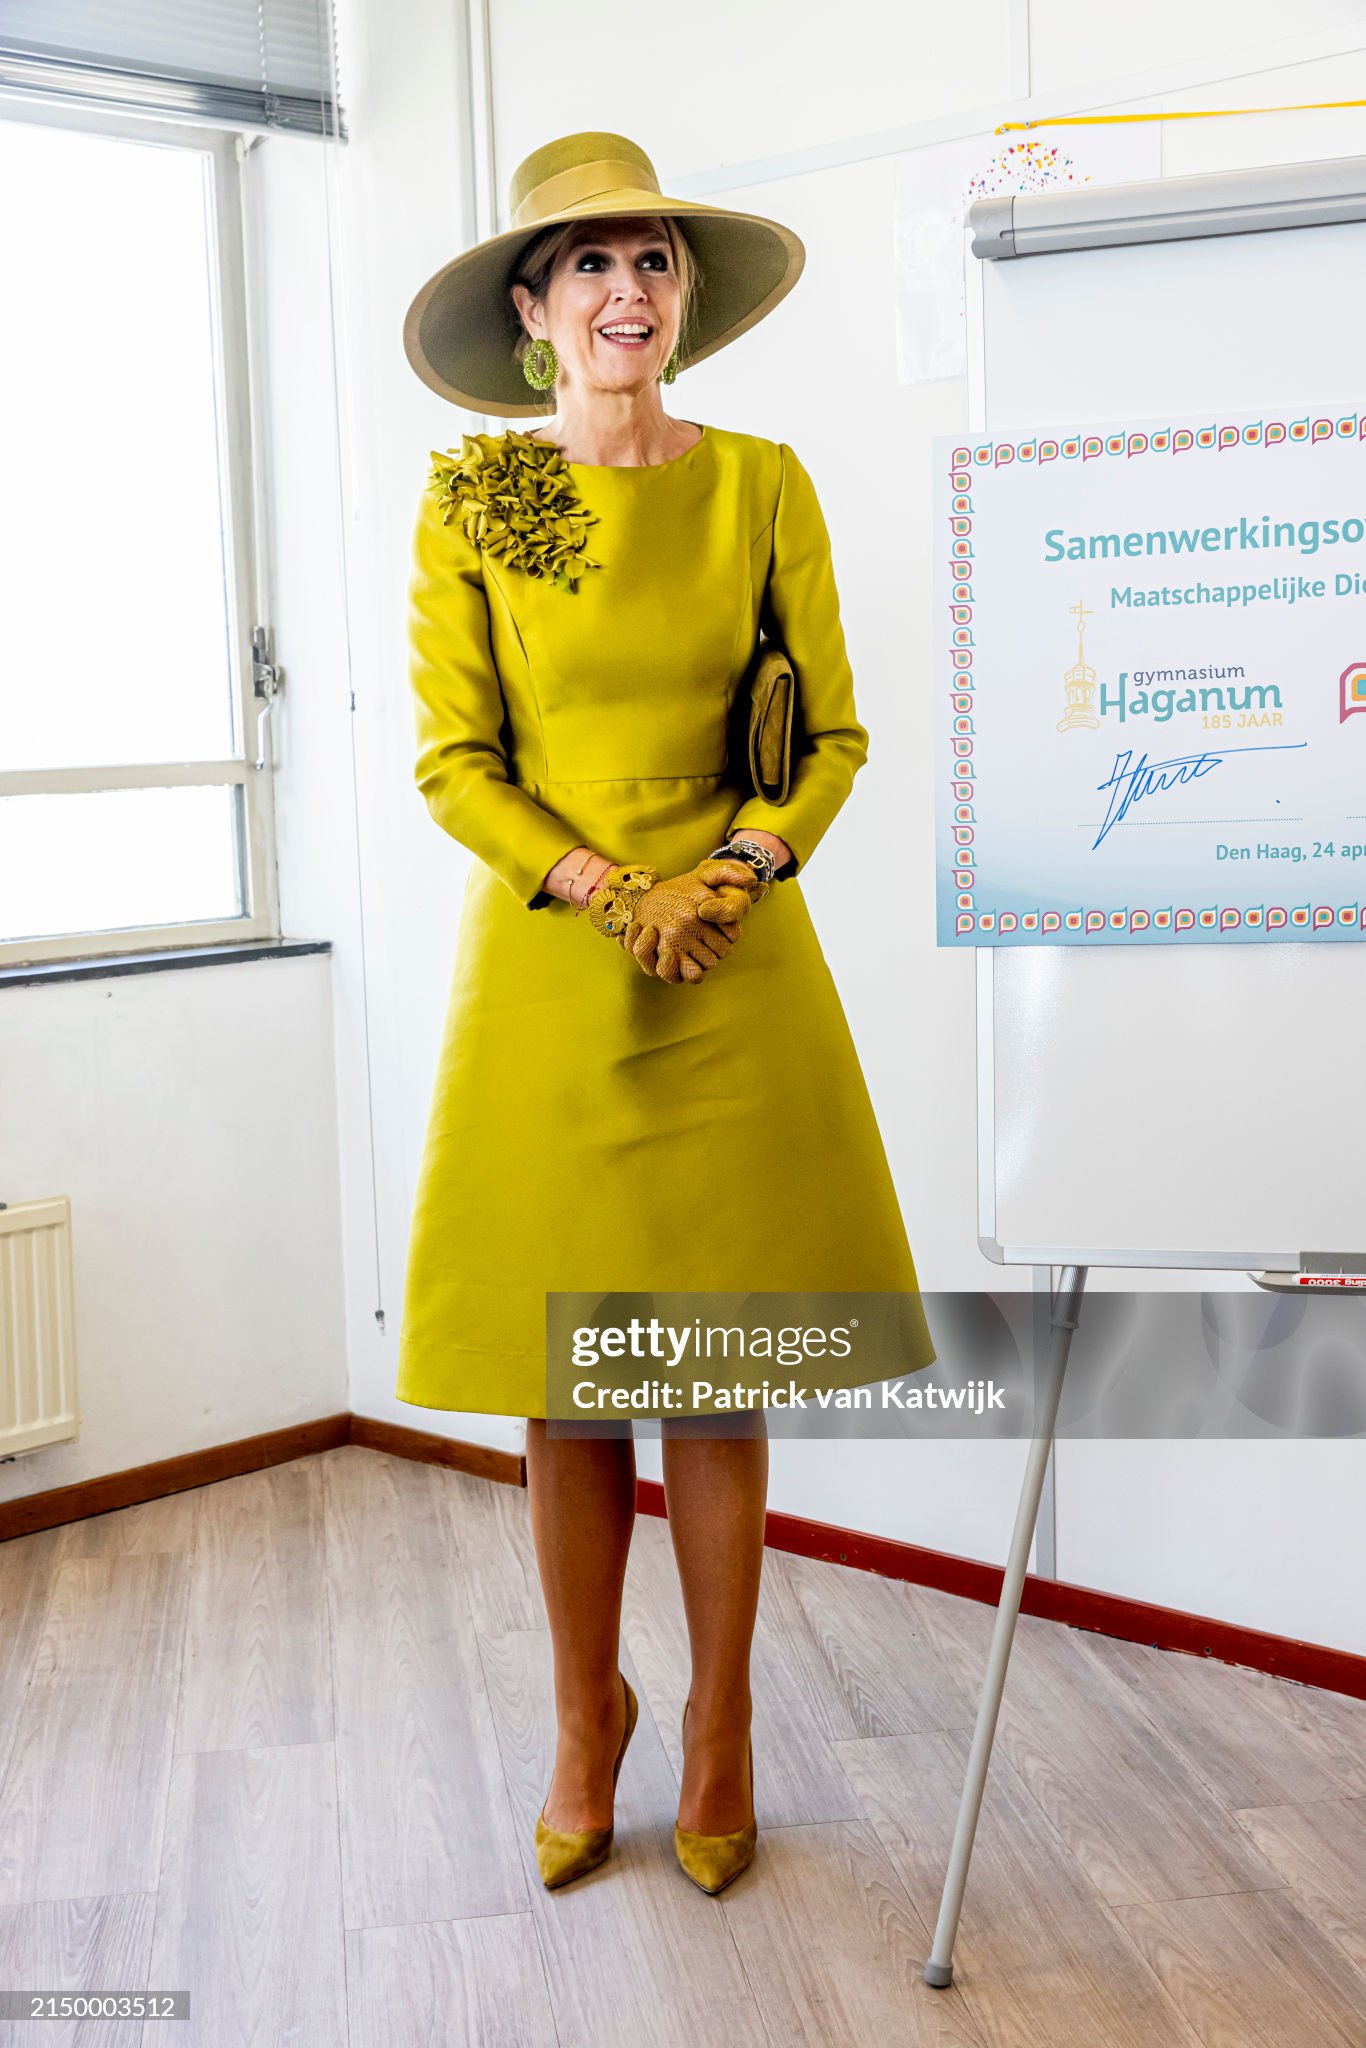 queen-maxima-of-the-netherlands-attends-the-10th-anniversary-language-in-the-hague.jpg?s=2048x2048&w=gi&k=20&c=s8OULrwVZo-Xx8Npm-of4P5580RBrlbxjkqVrEouhcc=